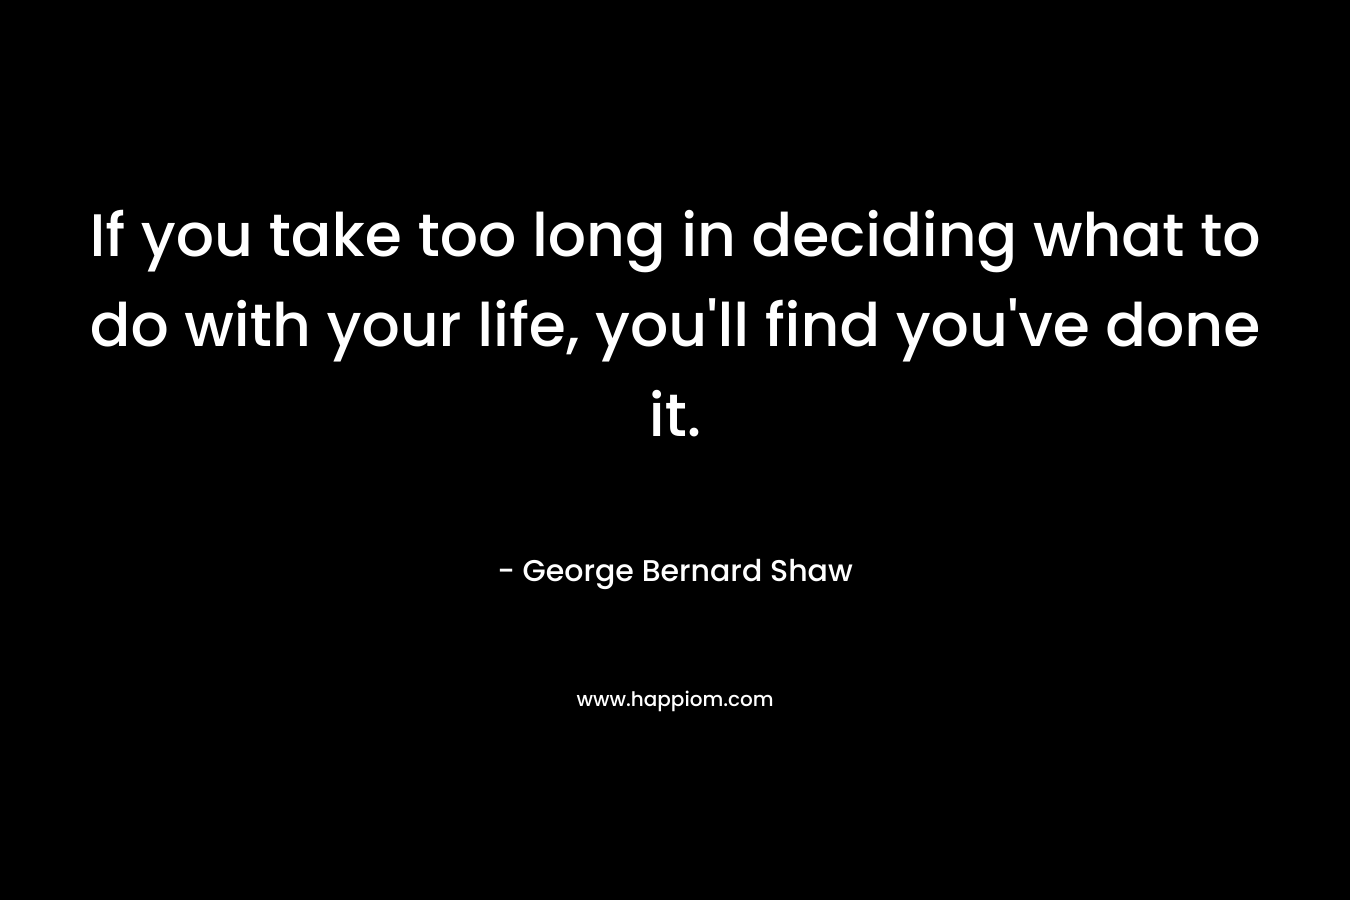 If you take too long in deciding what to do with your life, you'll find you've done it.